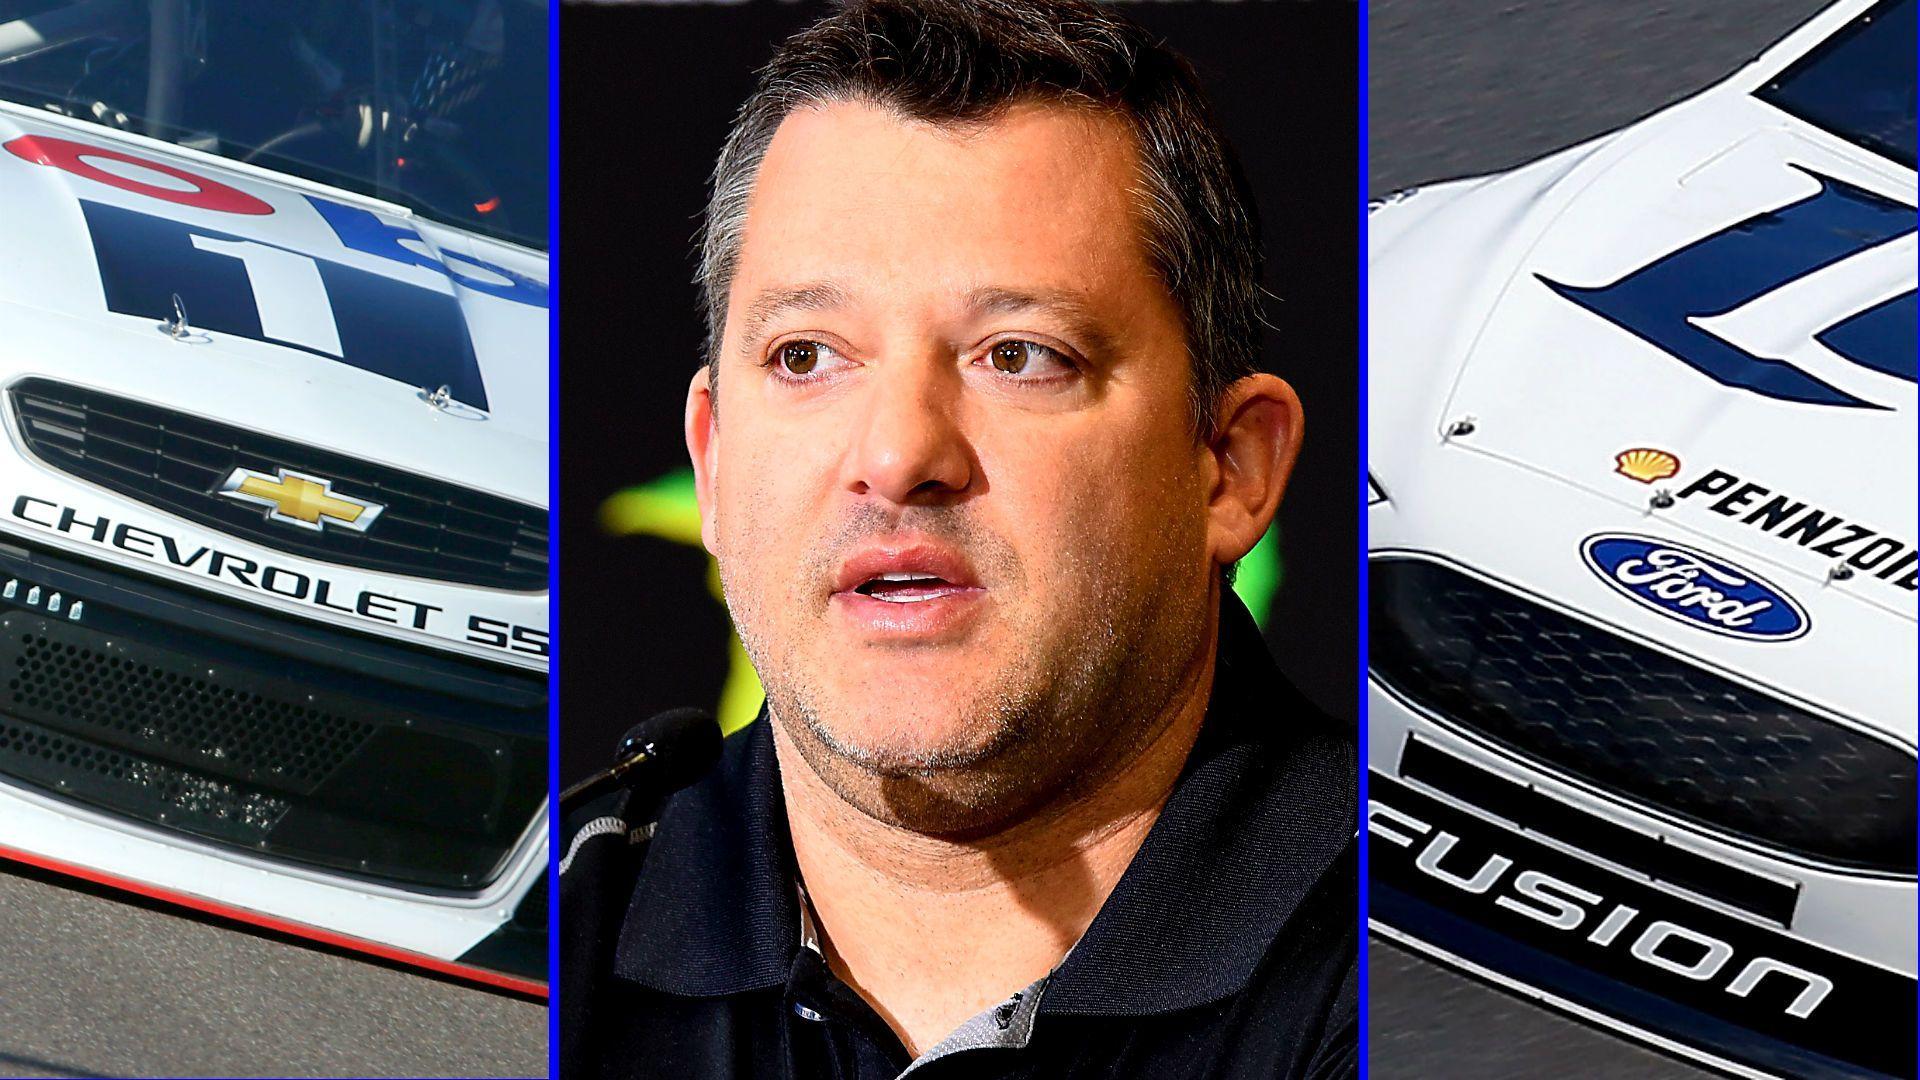 With Stewart Haas Switch, Ford Recharges Its NASCAR Operation